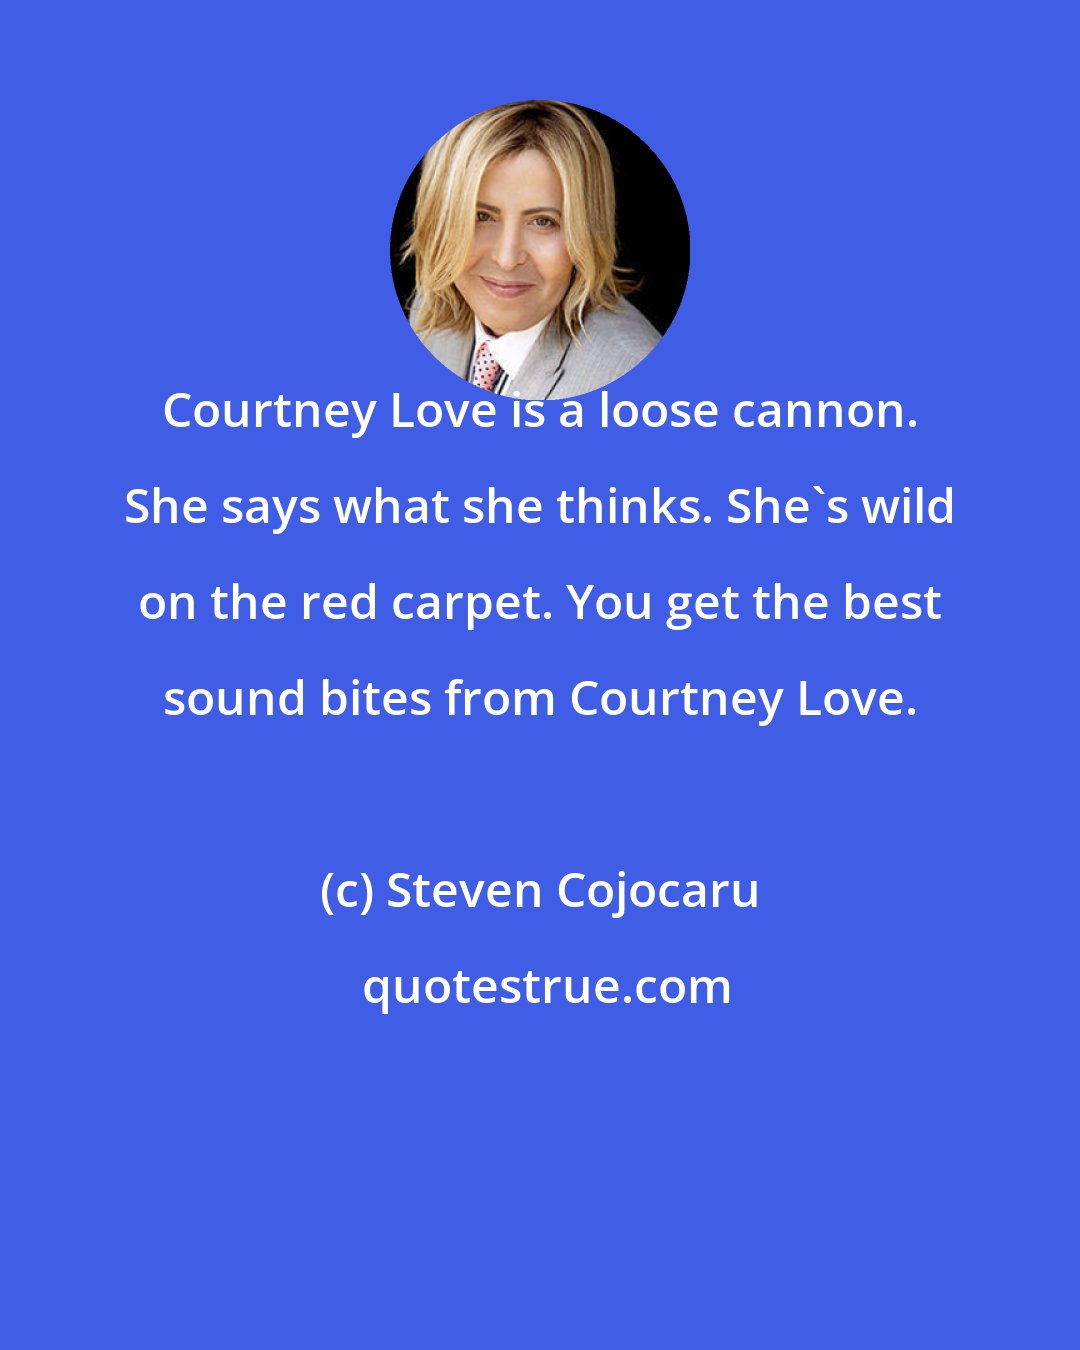 Steven Cojocaru: Courtney Love is a loose cannon. She says what she thinks. She's wild on the red carpet. You get the best sound bites from Courtney Love.